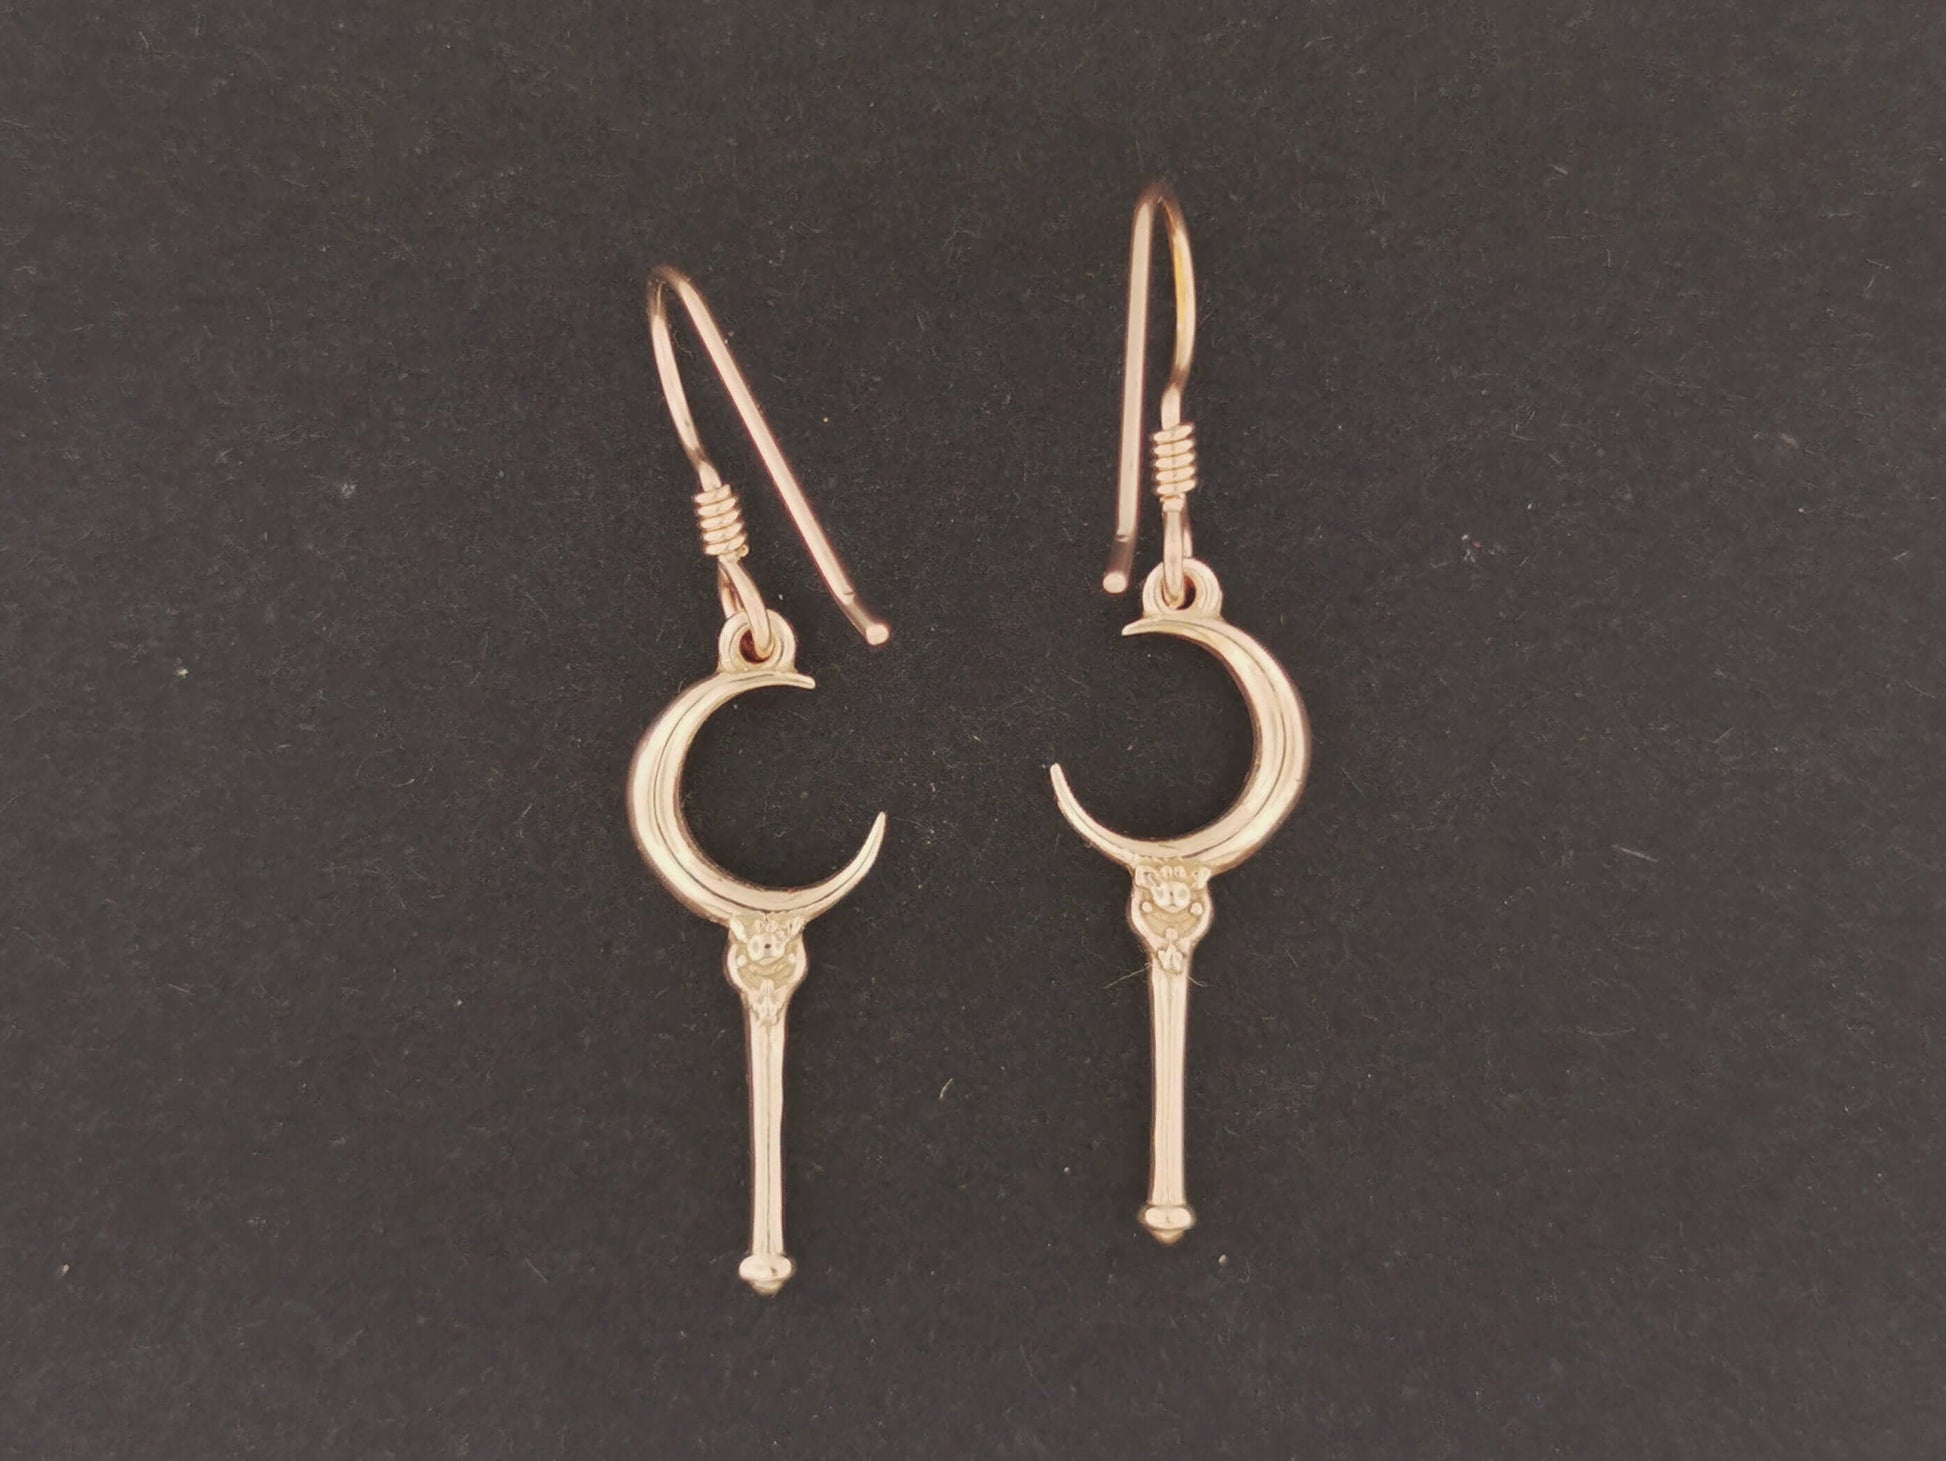 Crescent Moon Wand Earrings in Sterling Silver or Antique Bronze, Lunar Wand Earrings